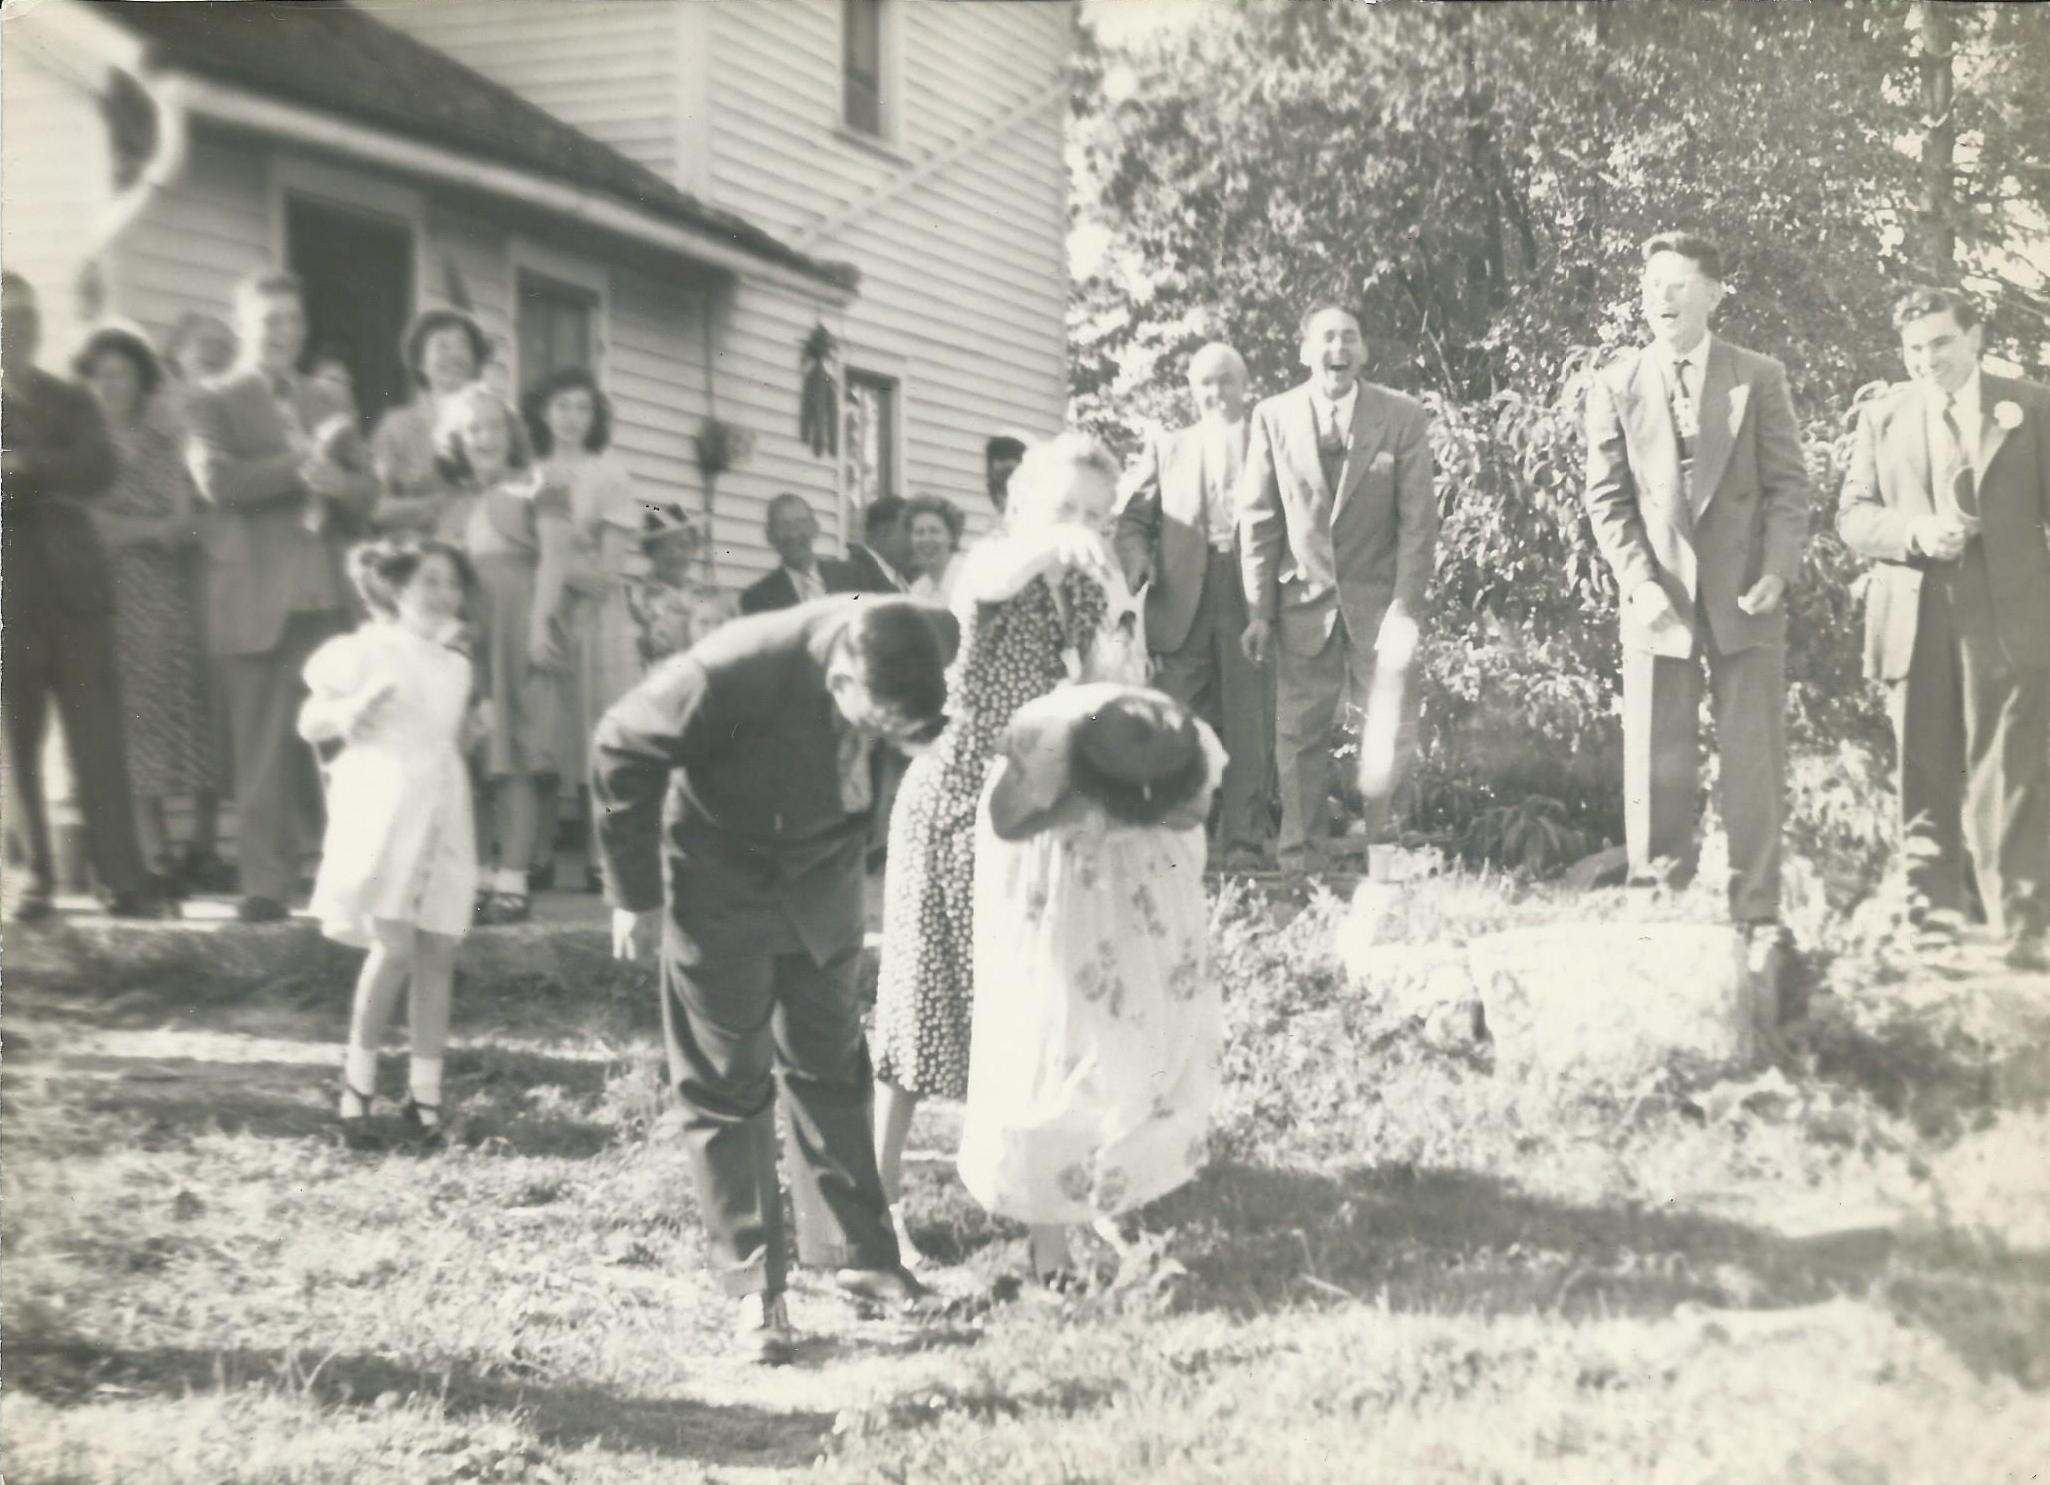 Rice throwing after the wedding of Dallas Munsell and Ruth Weinmann